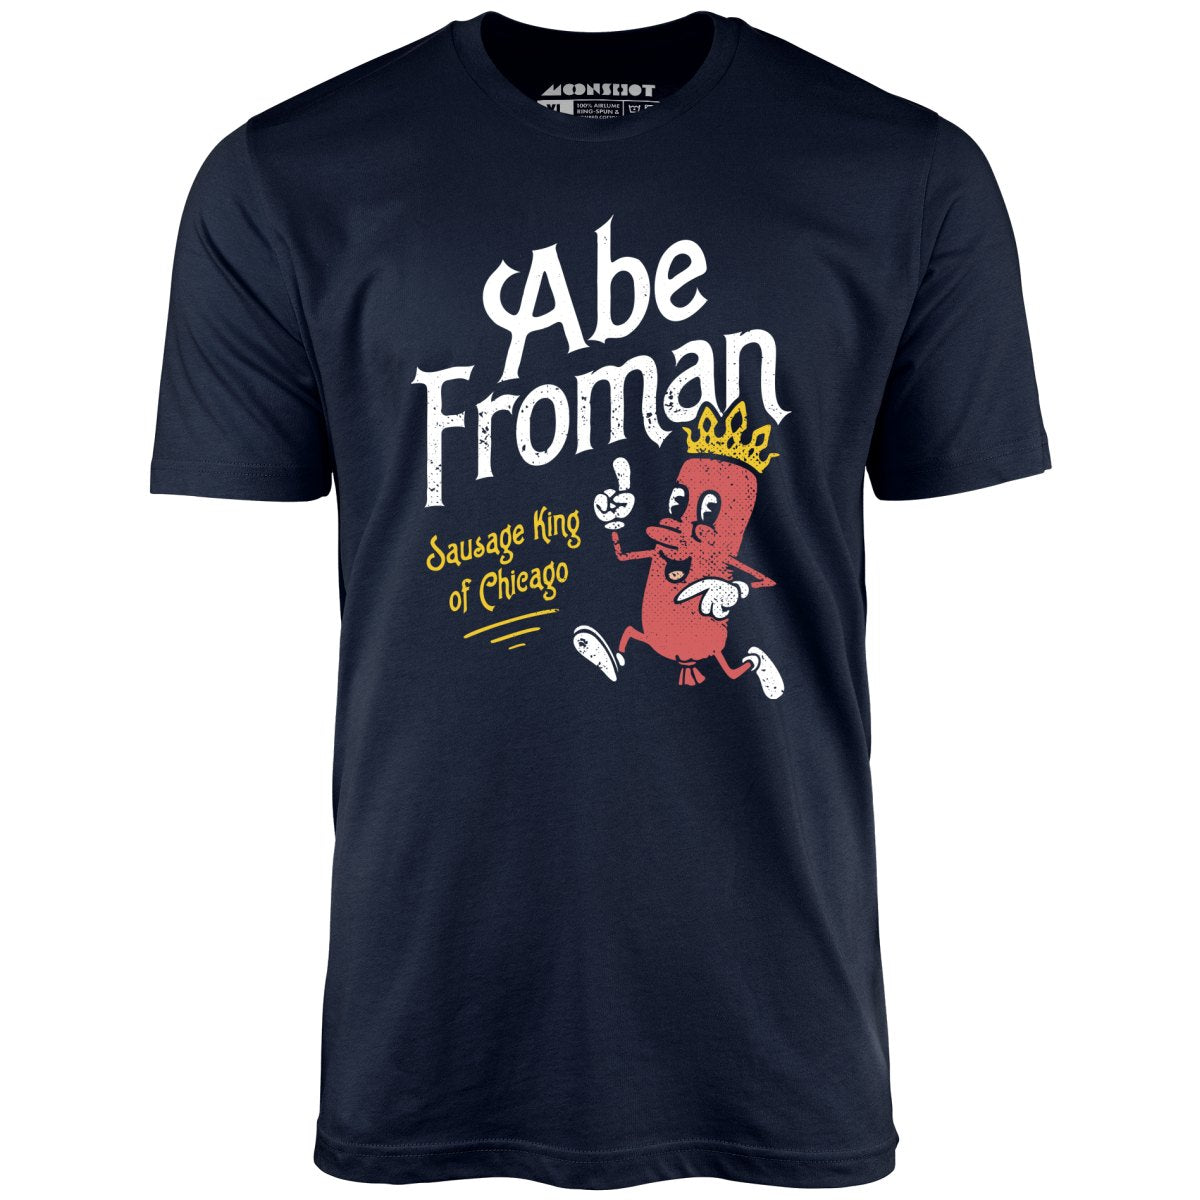 Abe Froman - Sausage King of Chicago - Unisex T-Shirt